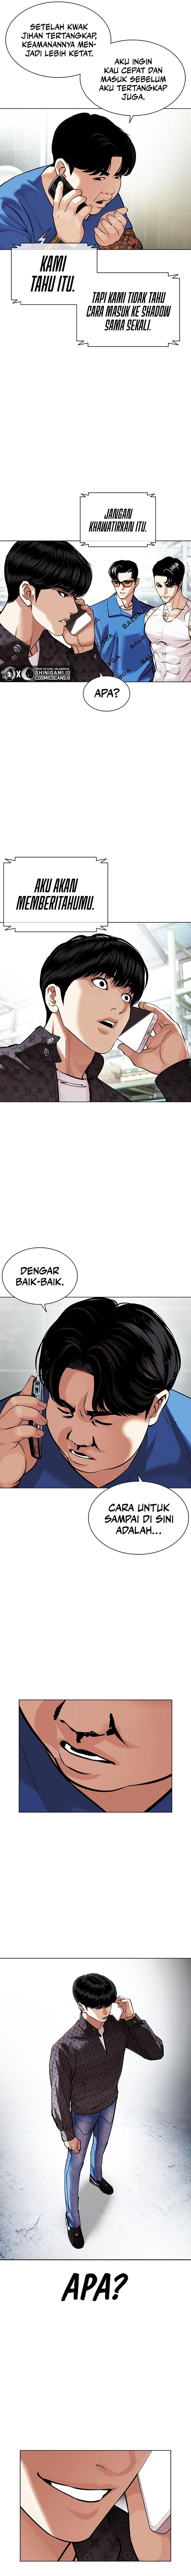 Lookism Chapter 450 Image 7